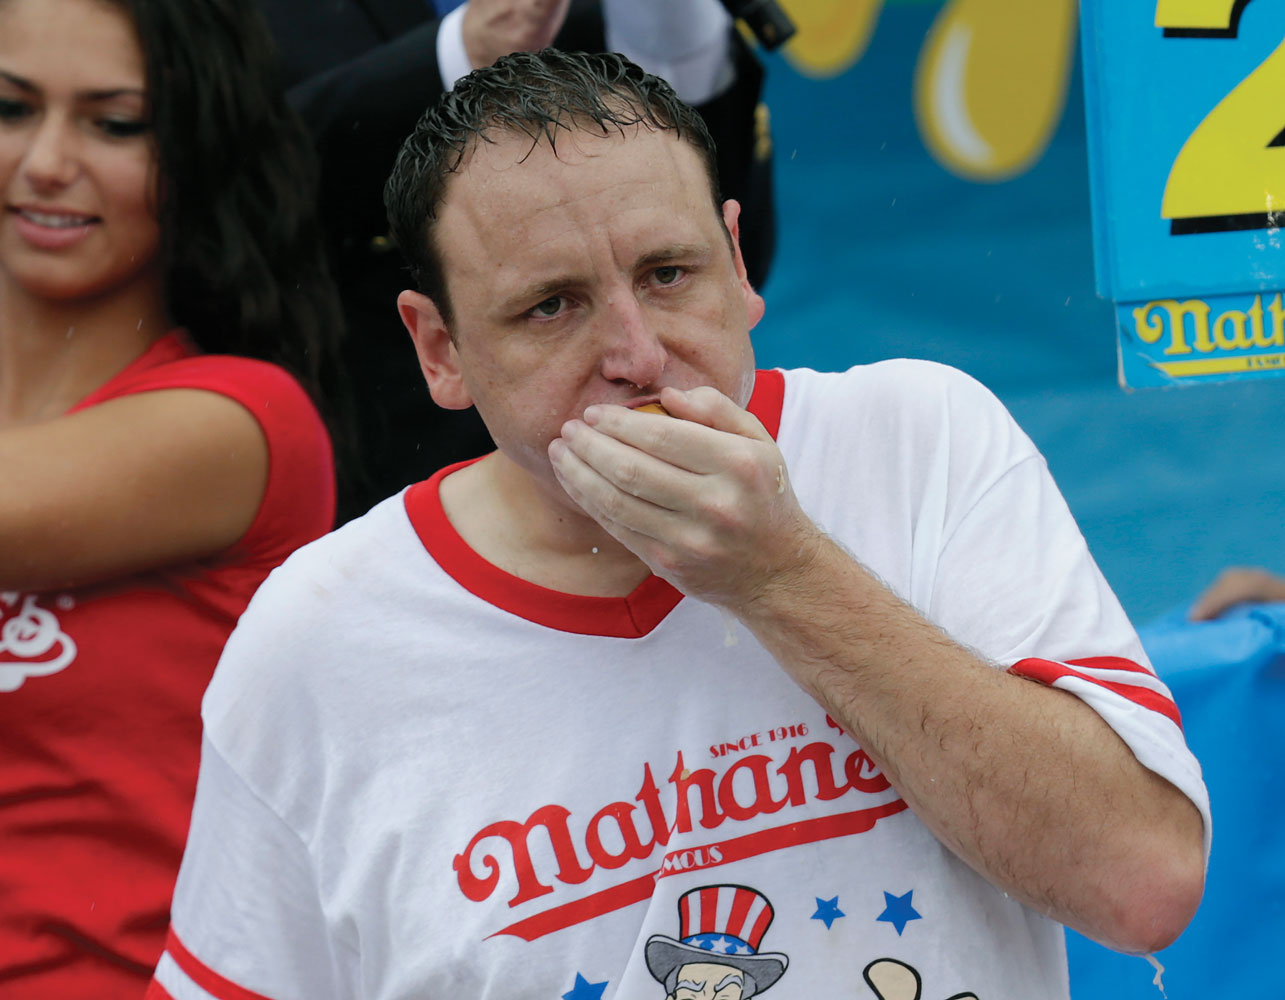 Joey Chestnut, the defending champion and a world record holder,  devoured a total of 61 hot dogs for his eighth title.